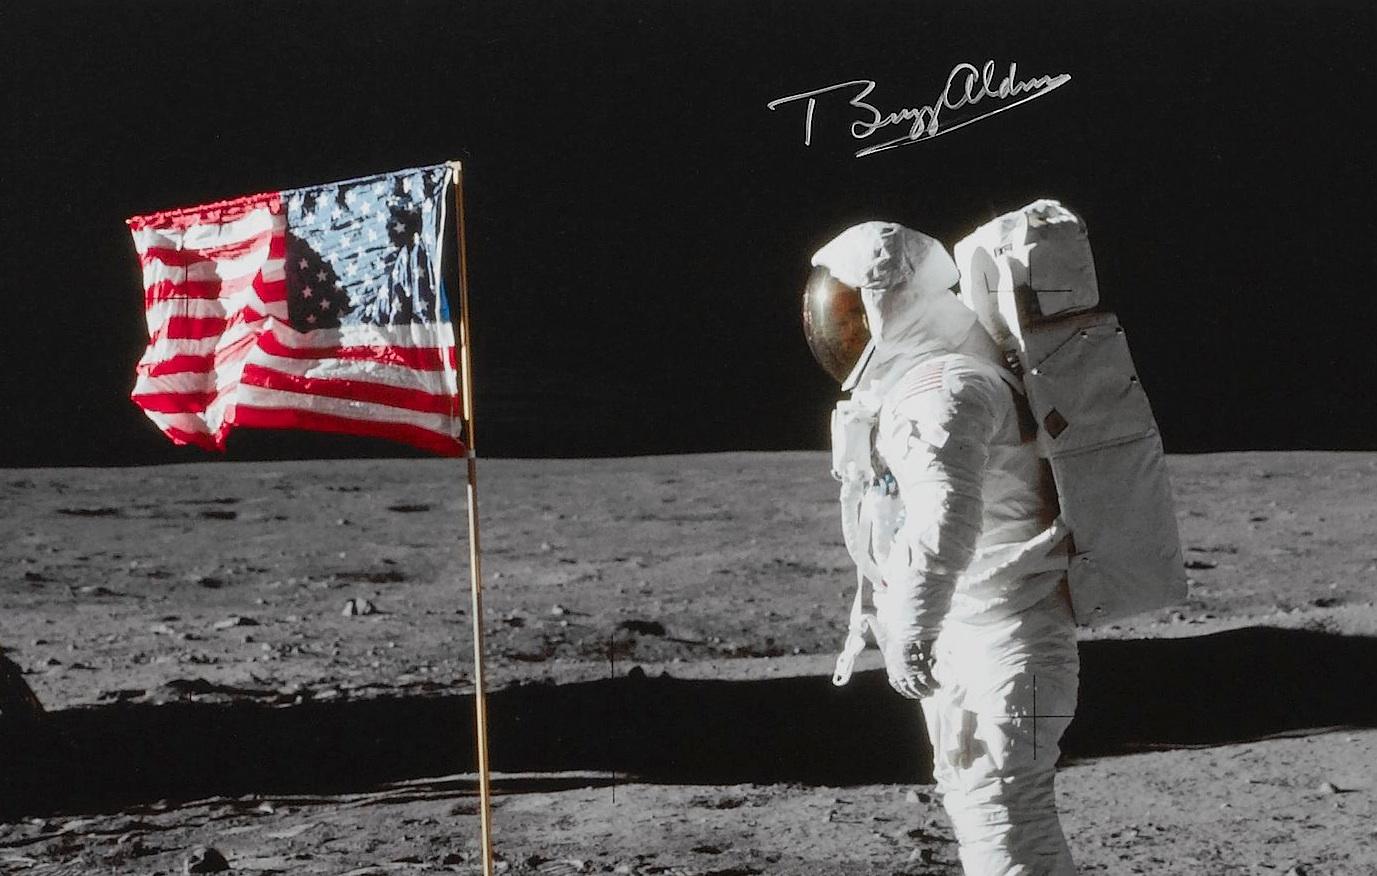 Presented is an exclusive Apollo 11 Collage, including authentic materials relating to astronauts Neil Armstrong and Edwin “Buzz” Aldrin. The collage is made up of the following elements: Astronaut Buzz Aldrin with Flag Autographed Photograph; Neil